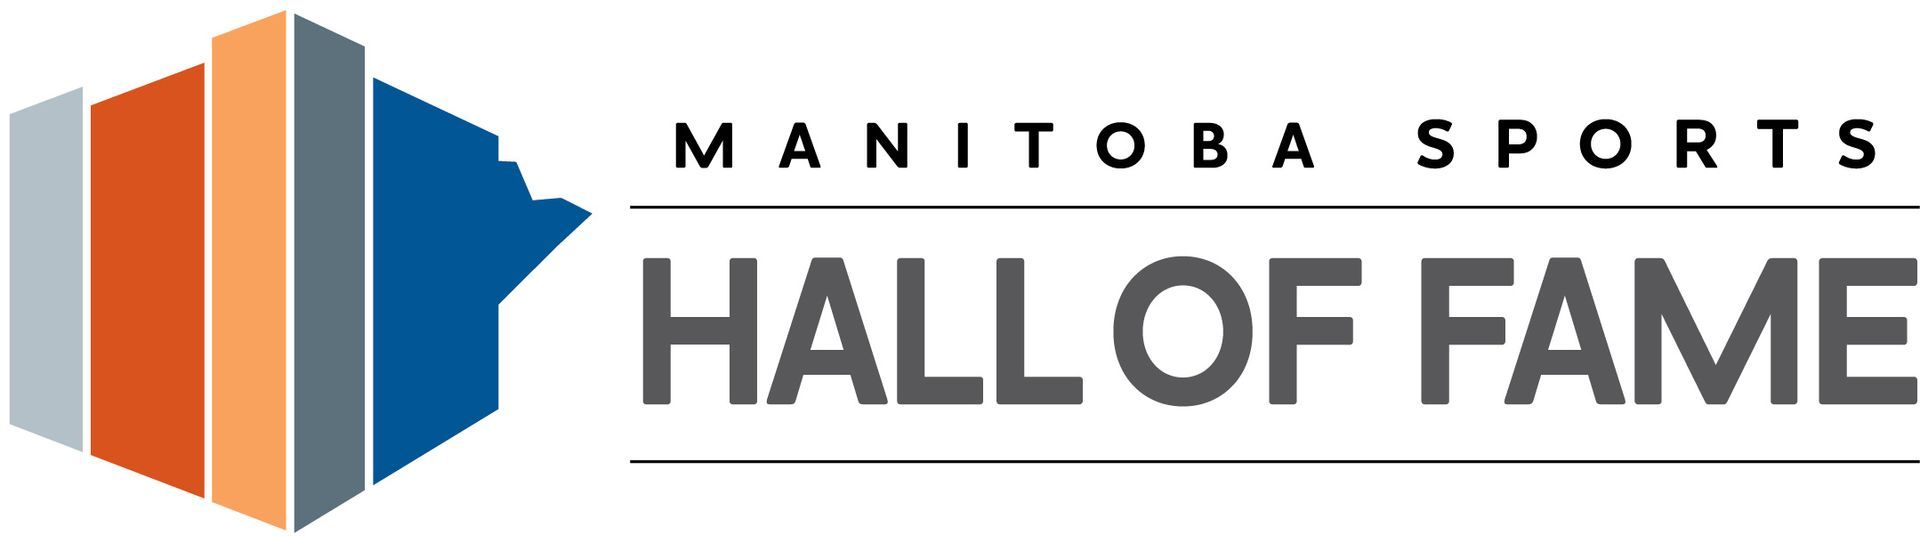 a logo for the manitoba sports hall of fame .